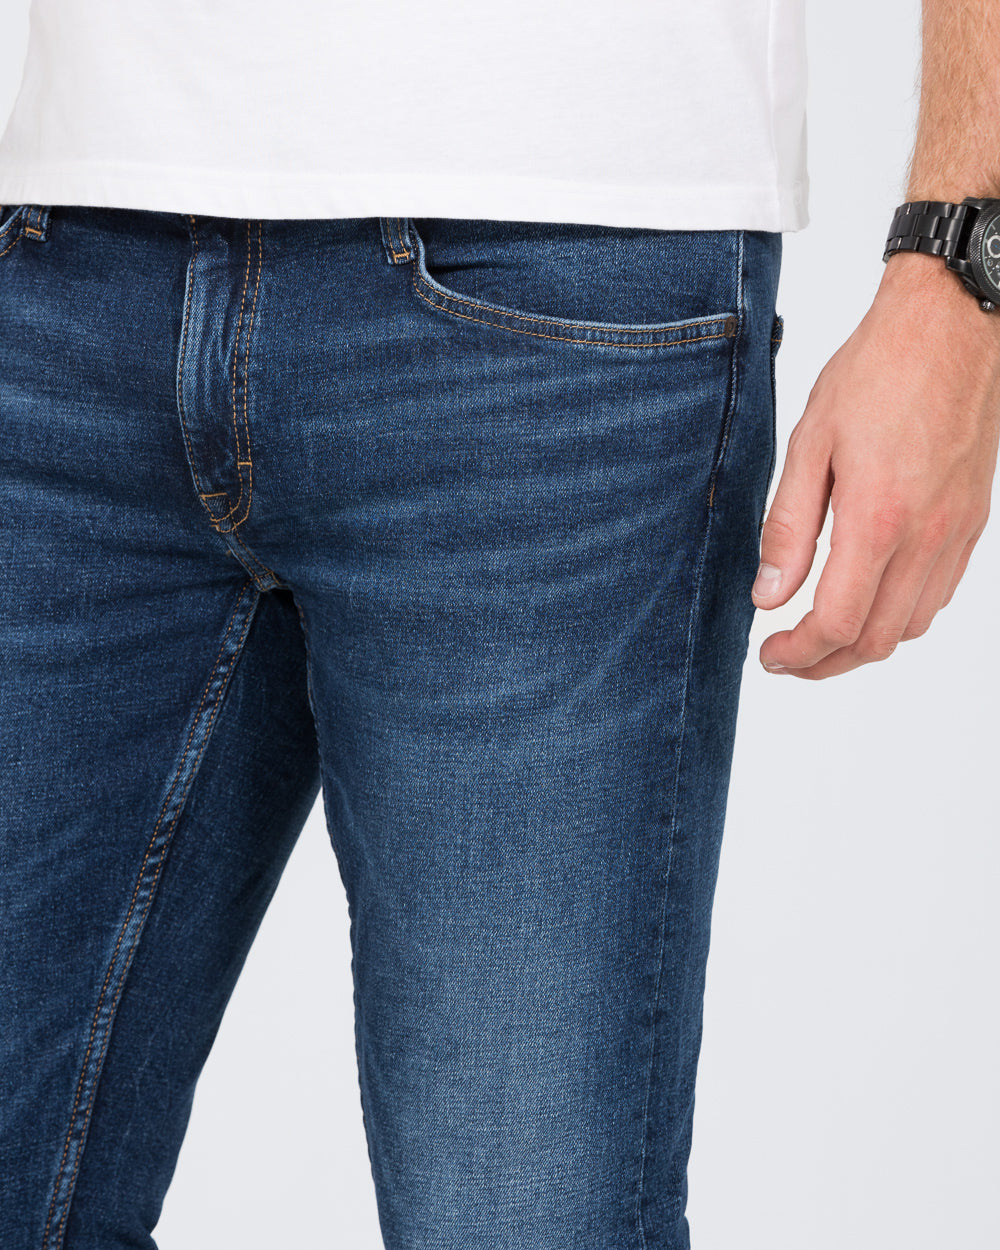 Mustang Oregon Slim Fit Tall Jeans (blue wash)